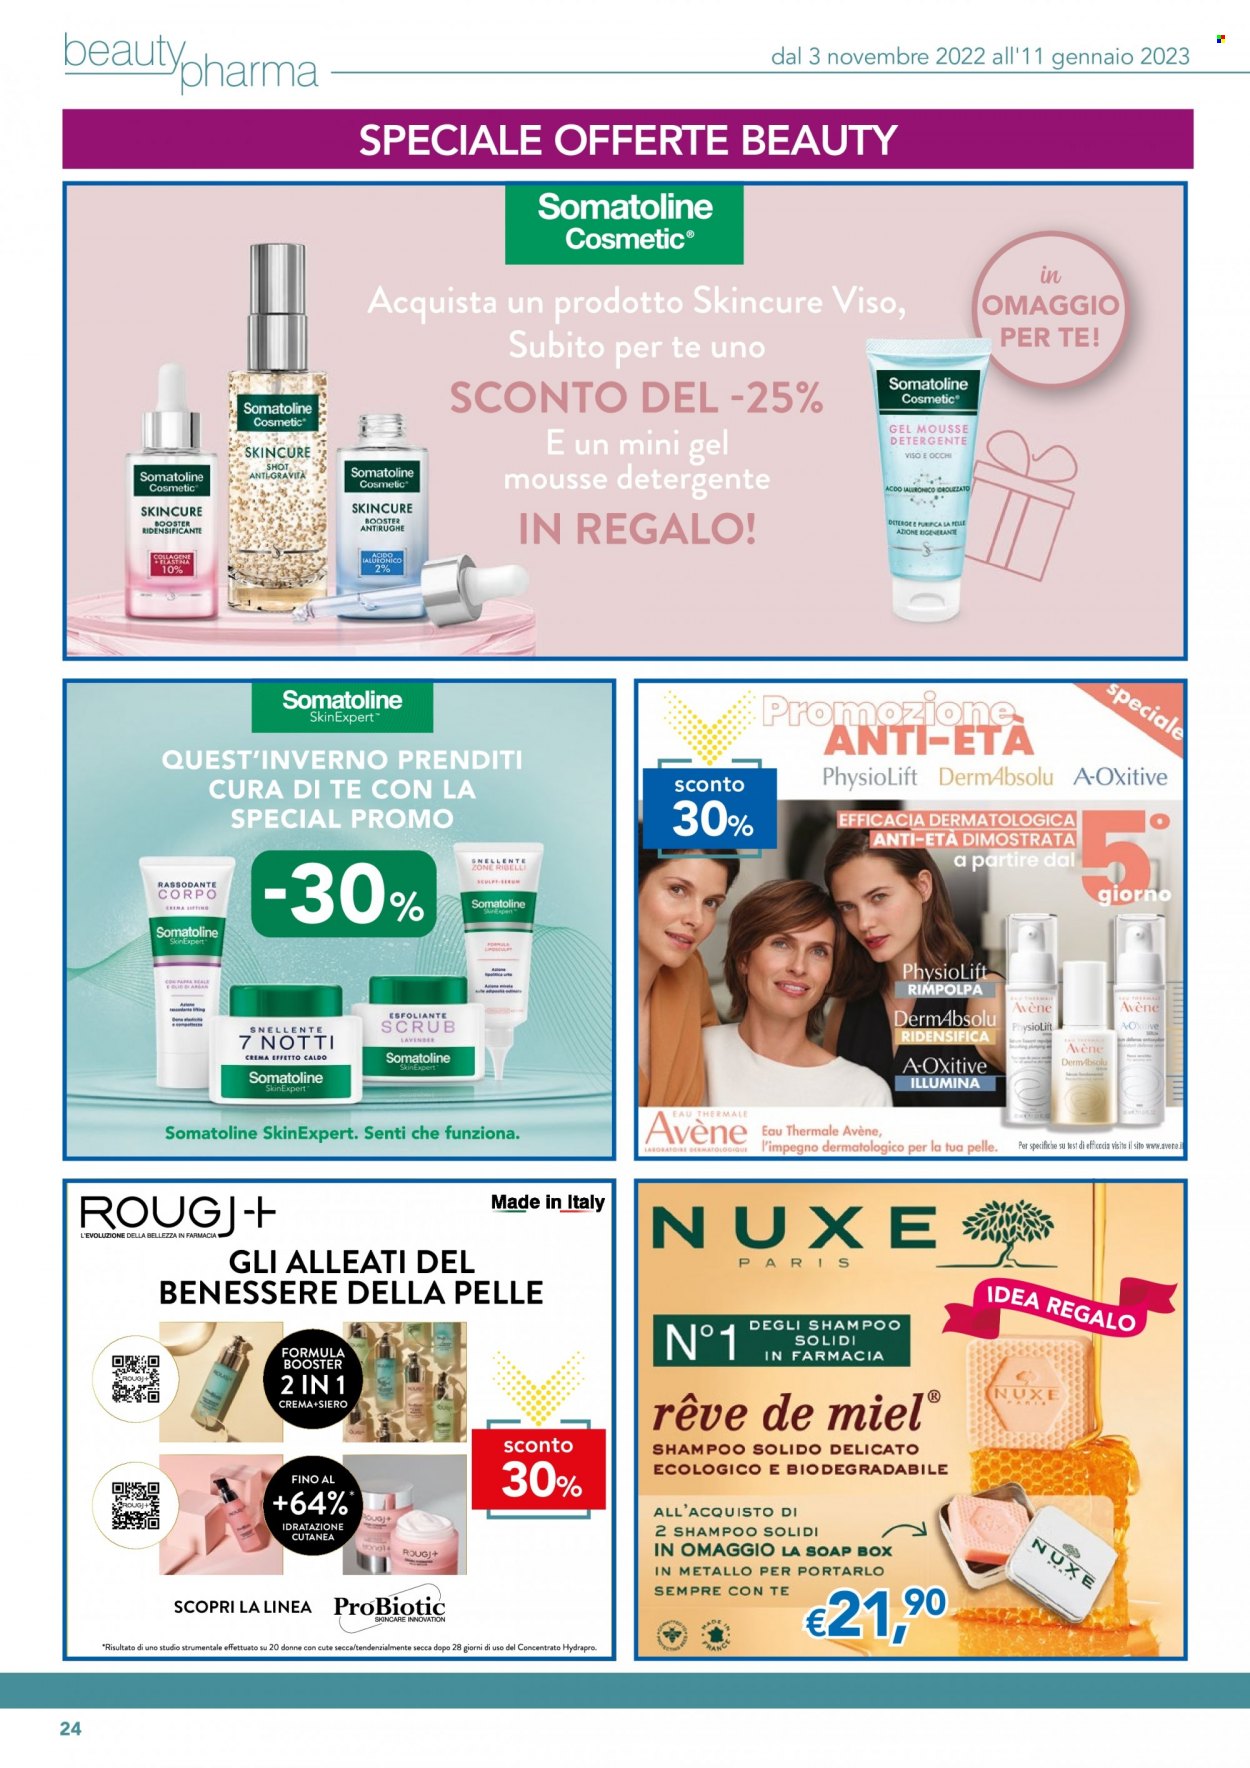 thumbnail - Volantino Migross - 3/11/2022 - 11/1/2023 - Prodotti in offerta - Avène, mousse, detergente, Eau Thermale, Nuxe, mousse detergente viso, detergente viso, shampoo, shampoo solido, argan. Pagina 24.